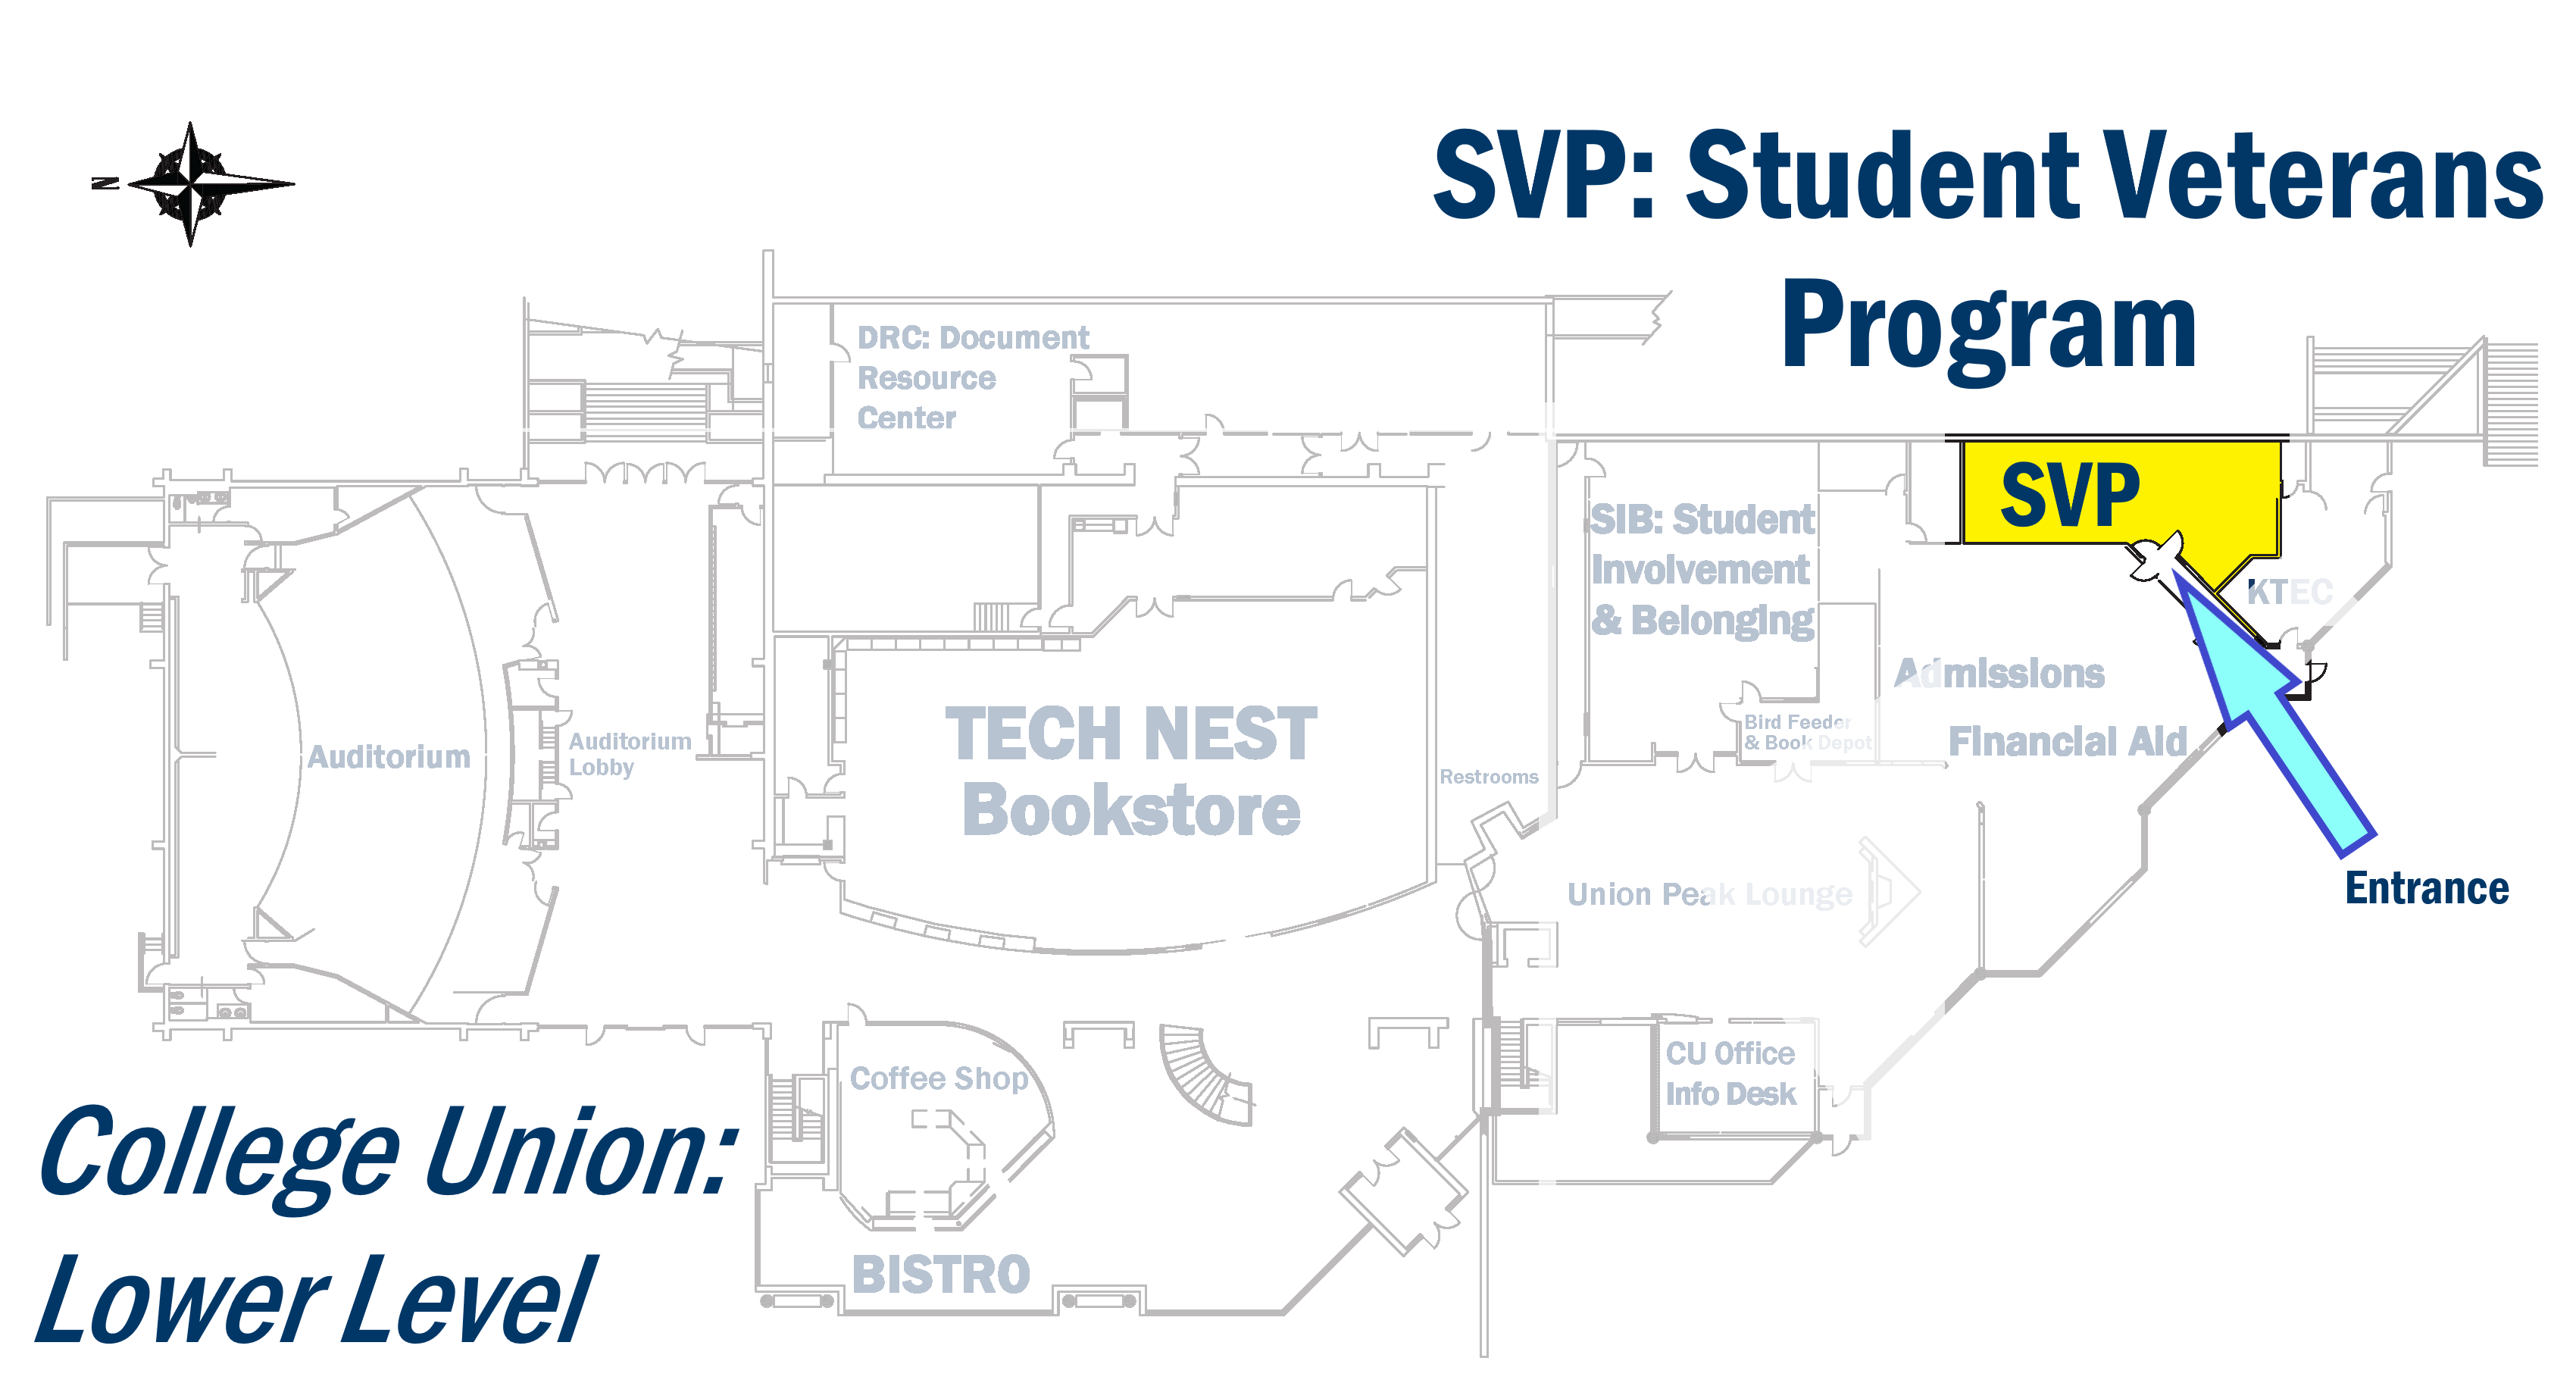 Image shows a map of the College Union highlighting the SVP Lounge which is located on the 1st Floor of the College Union building, in the same hallway as KTEC (outdoor entrance near southern stairs).